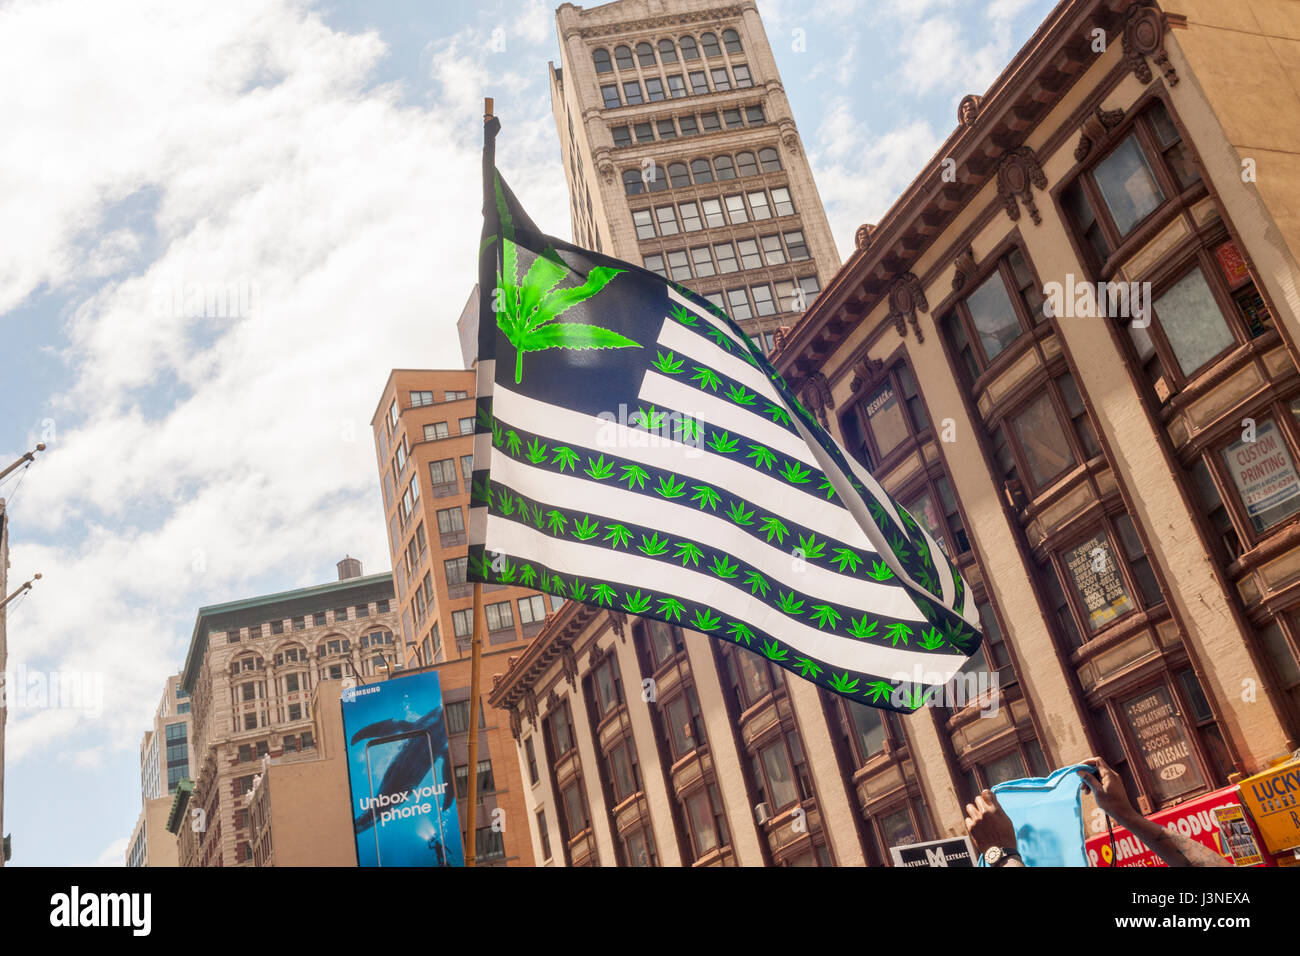 New York, USA. 06th May, 2017. Advocates for the legalization of marijuana march in New York on Saturday, May 6, 2017 at the annual NYC Cannabis Parade. The march included a wide range of demographics from millennials to old-time hippies. The participants in the parade are calling for the legalization of marijuana for medical treatment and for recreational uses. ( © Richard B. Levine) Credit: Richard Levine/Alamy Live News Stock Photo